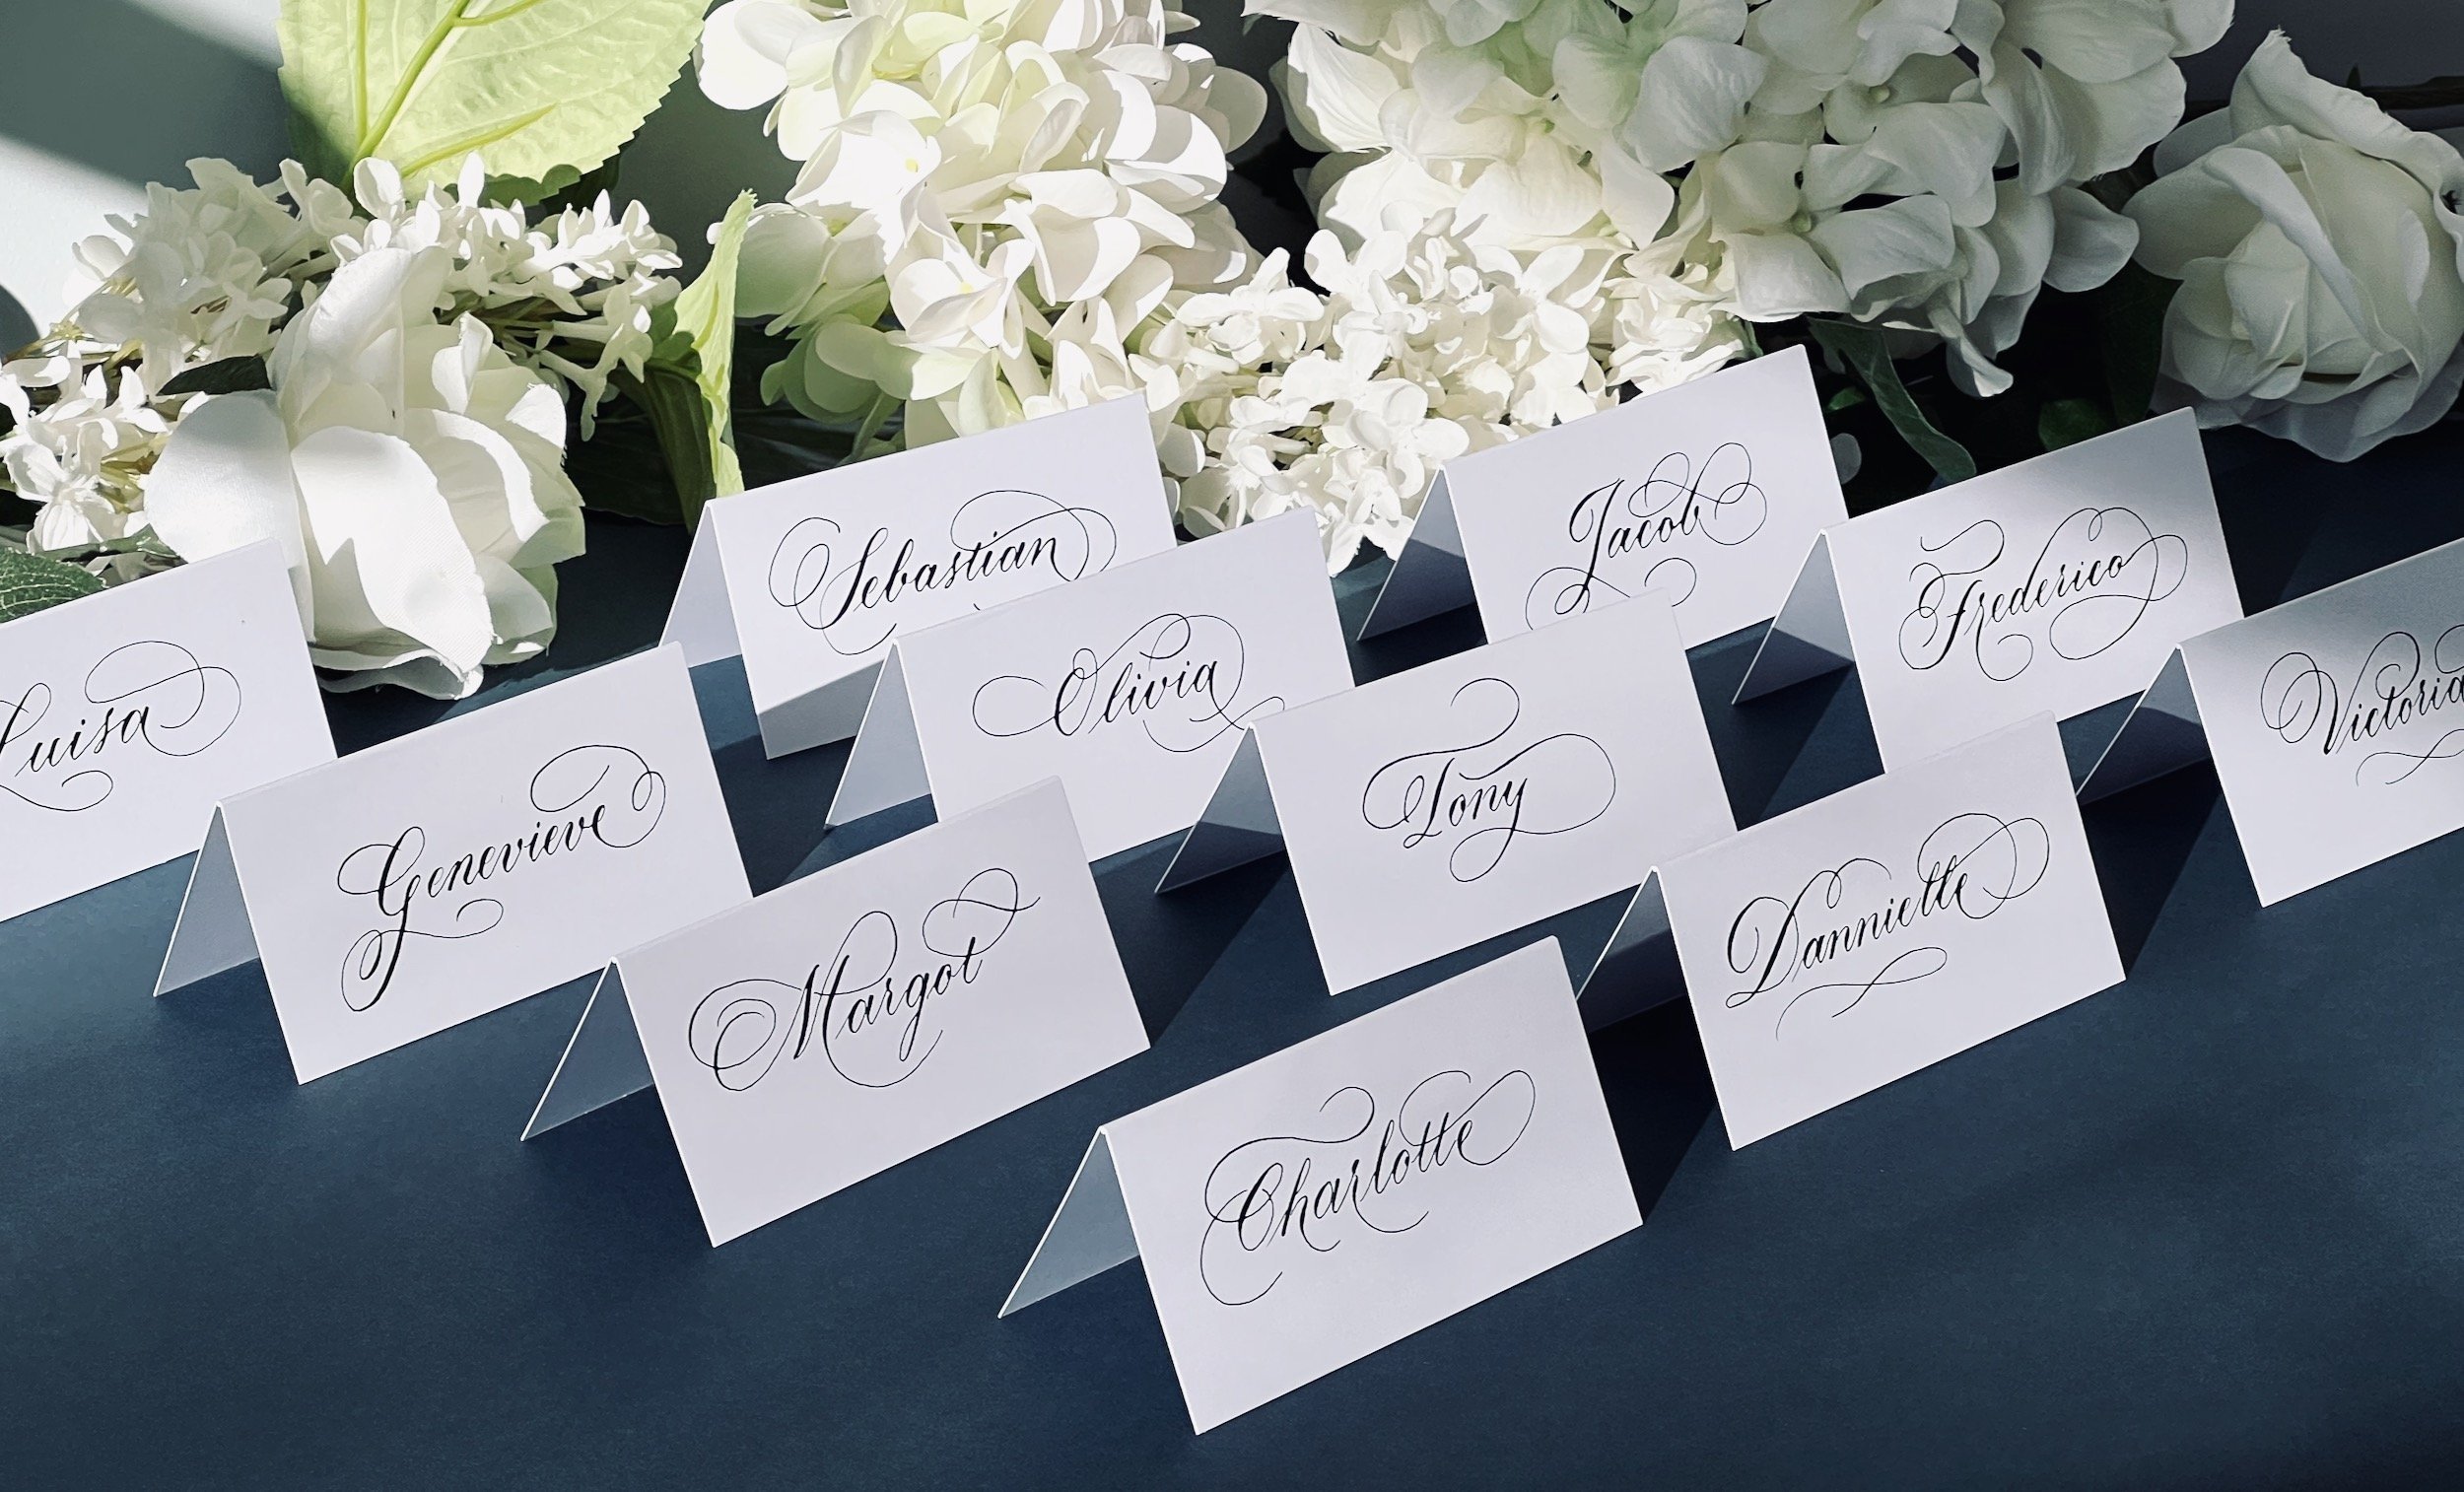 Delfont+Ink+Flourished+Copperplate+placecards.jpg